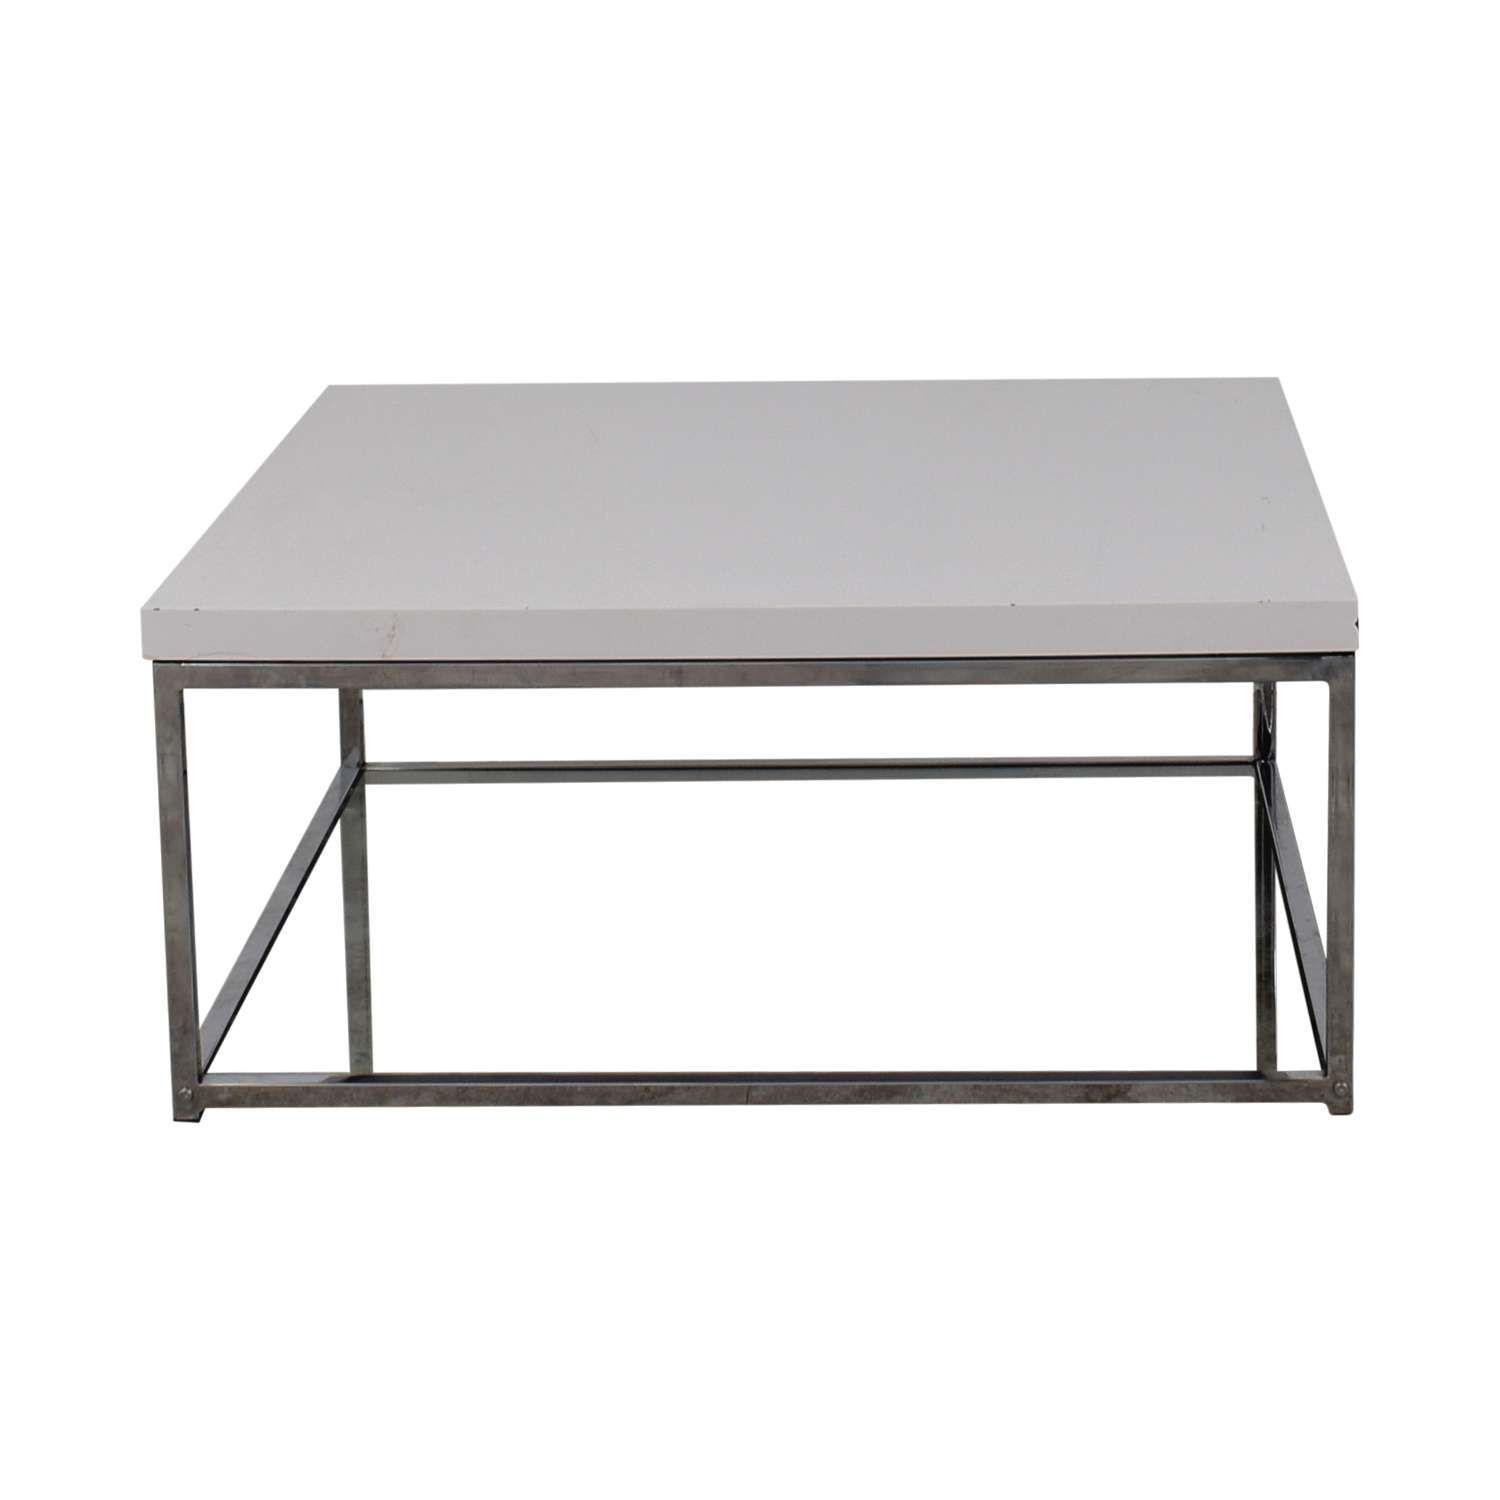 [%well Known White Square Coffee Table Pertaining To 43% Off – Safavieh Safavieh Malone White Square Coffee Table / Tables|43% Off – Safavieh Safavieh Malone White Square Coffee Table / Tables Throughout Latest White Square Coffee Table%] (View 1 of 20)